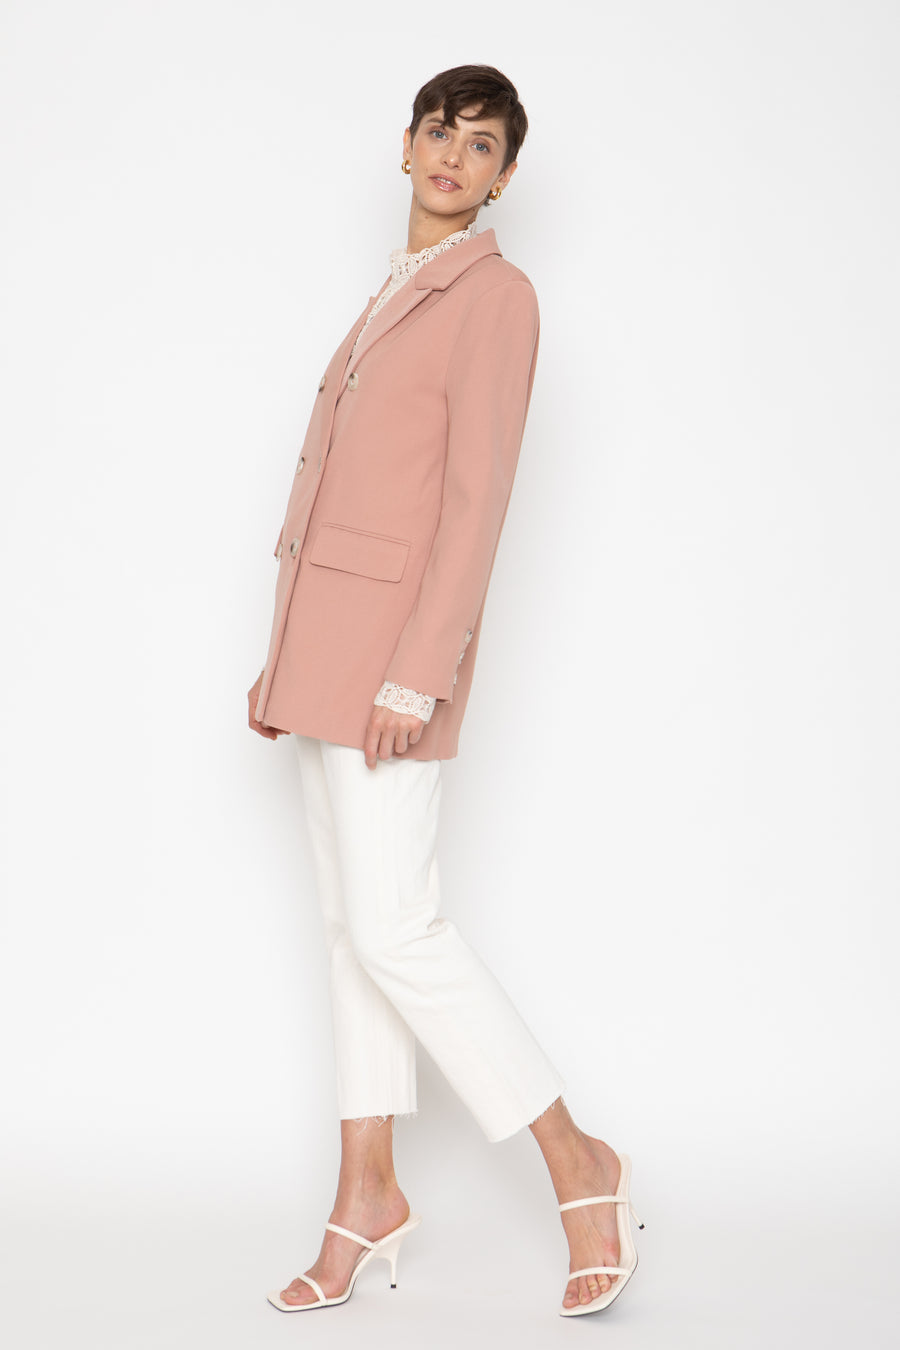 No Srcipt image - Images of 1 of 7 Dusty Rose Pink Color Way Wool Fabric Classic Double Breasted Staple Jacket Women's Workwear Office Wear Women's Fashion Sophisticated Style Chic Simple Staple Classic Pink Blazer Fall Jacket Fall Fashion Women's Outerwear Timeless Everyday Blazer Neutral Color The Emory Blazer In Dusty Rose Professional Attire